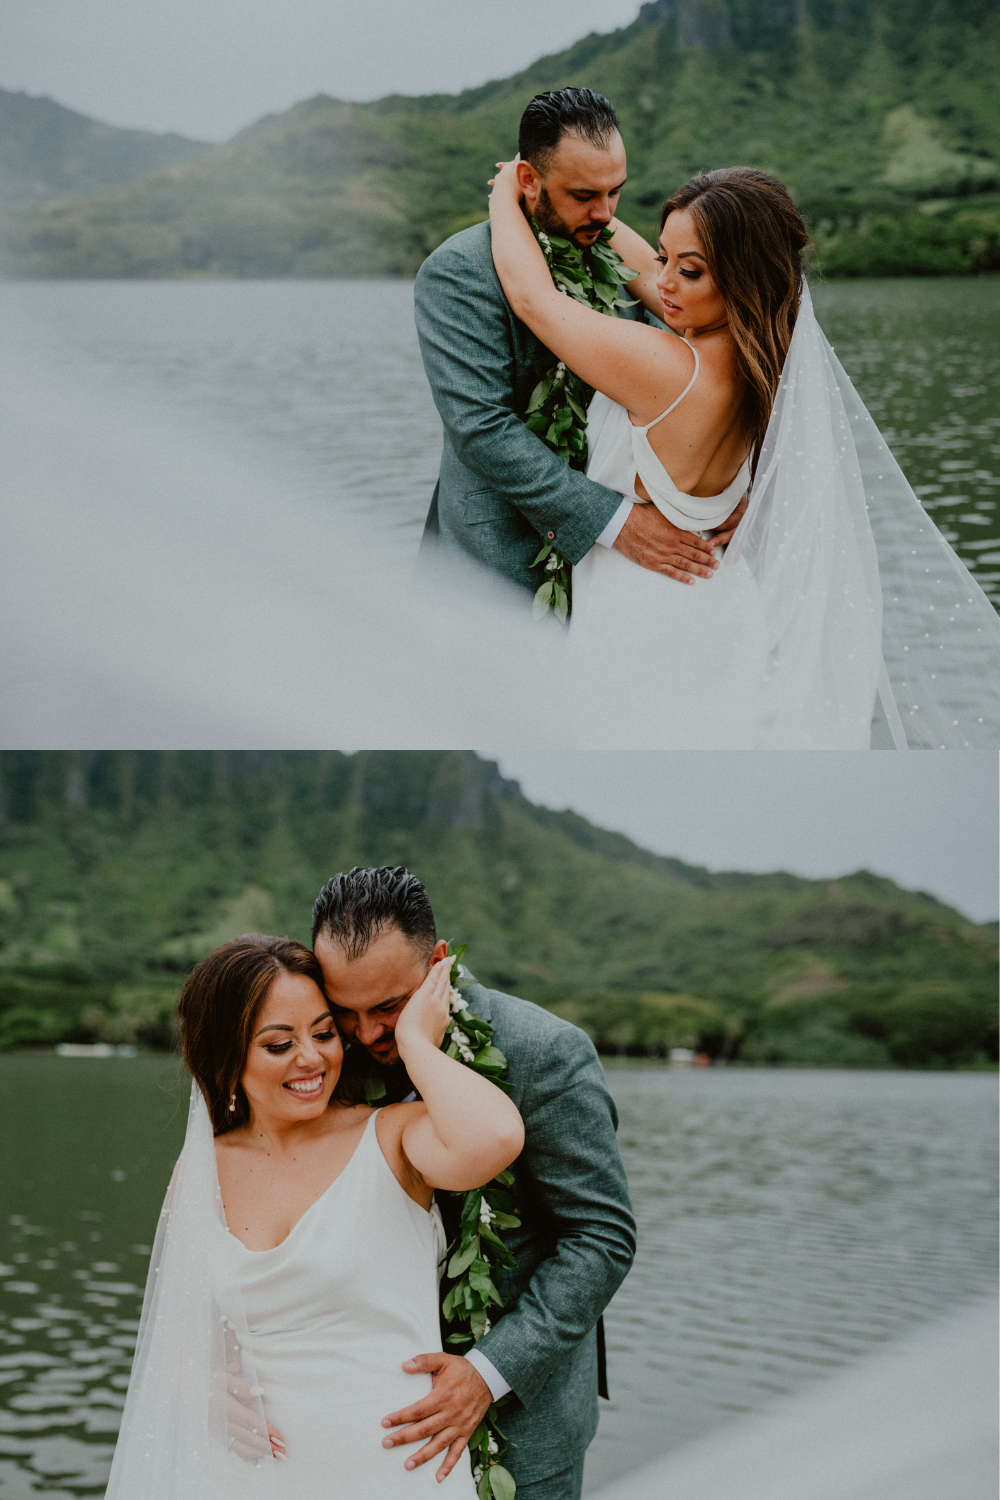 Bride and groom pose together after their wedding day on Kualoa Ranch while standing in front of the water on the beach in Oahu | Oahu Wedding Photographer, Oahu Elopement Photographer, Destination Wedding Photographer, Destination Elopement Photographer, Newlywed moments ideas, Newlywed Photography inspiration, Hawaii Elopement ideas | chelseaabril.com